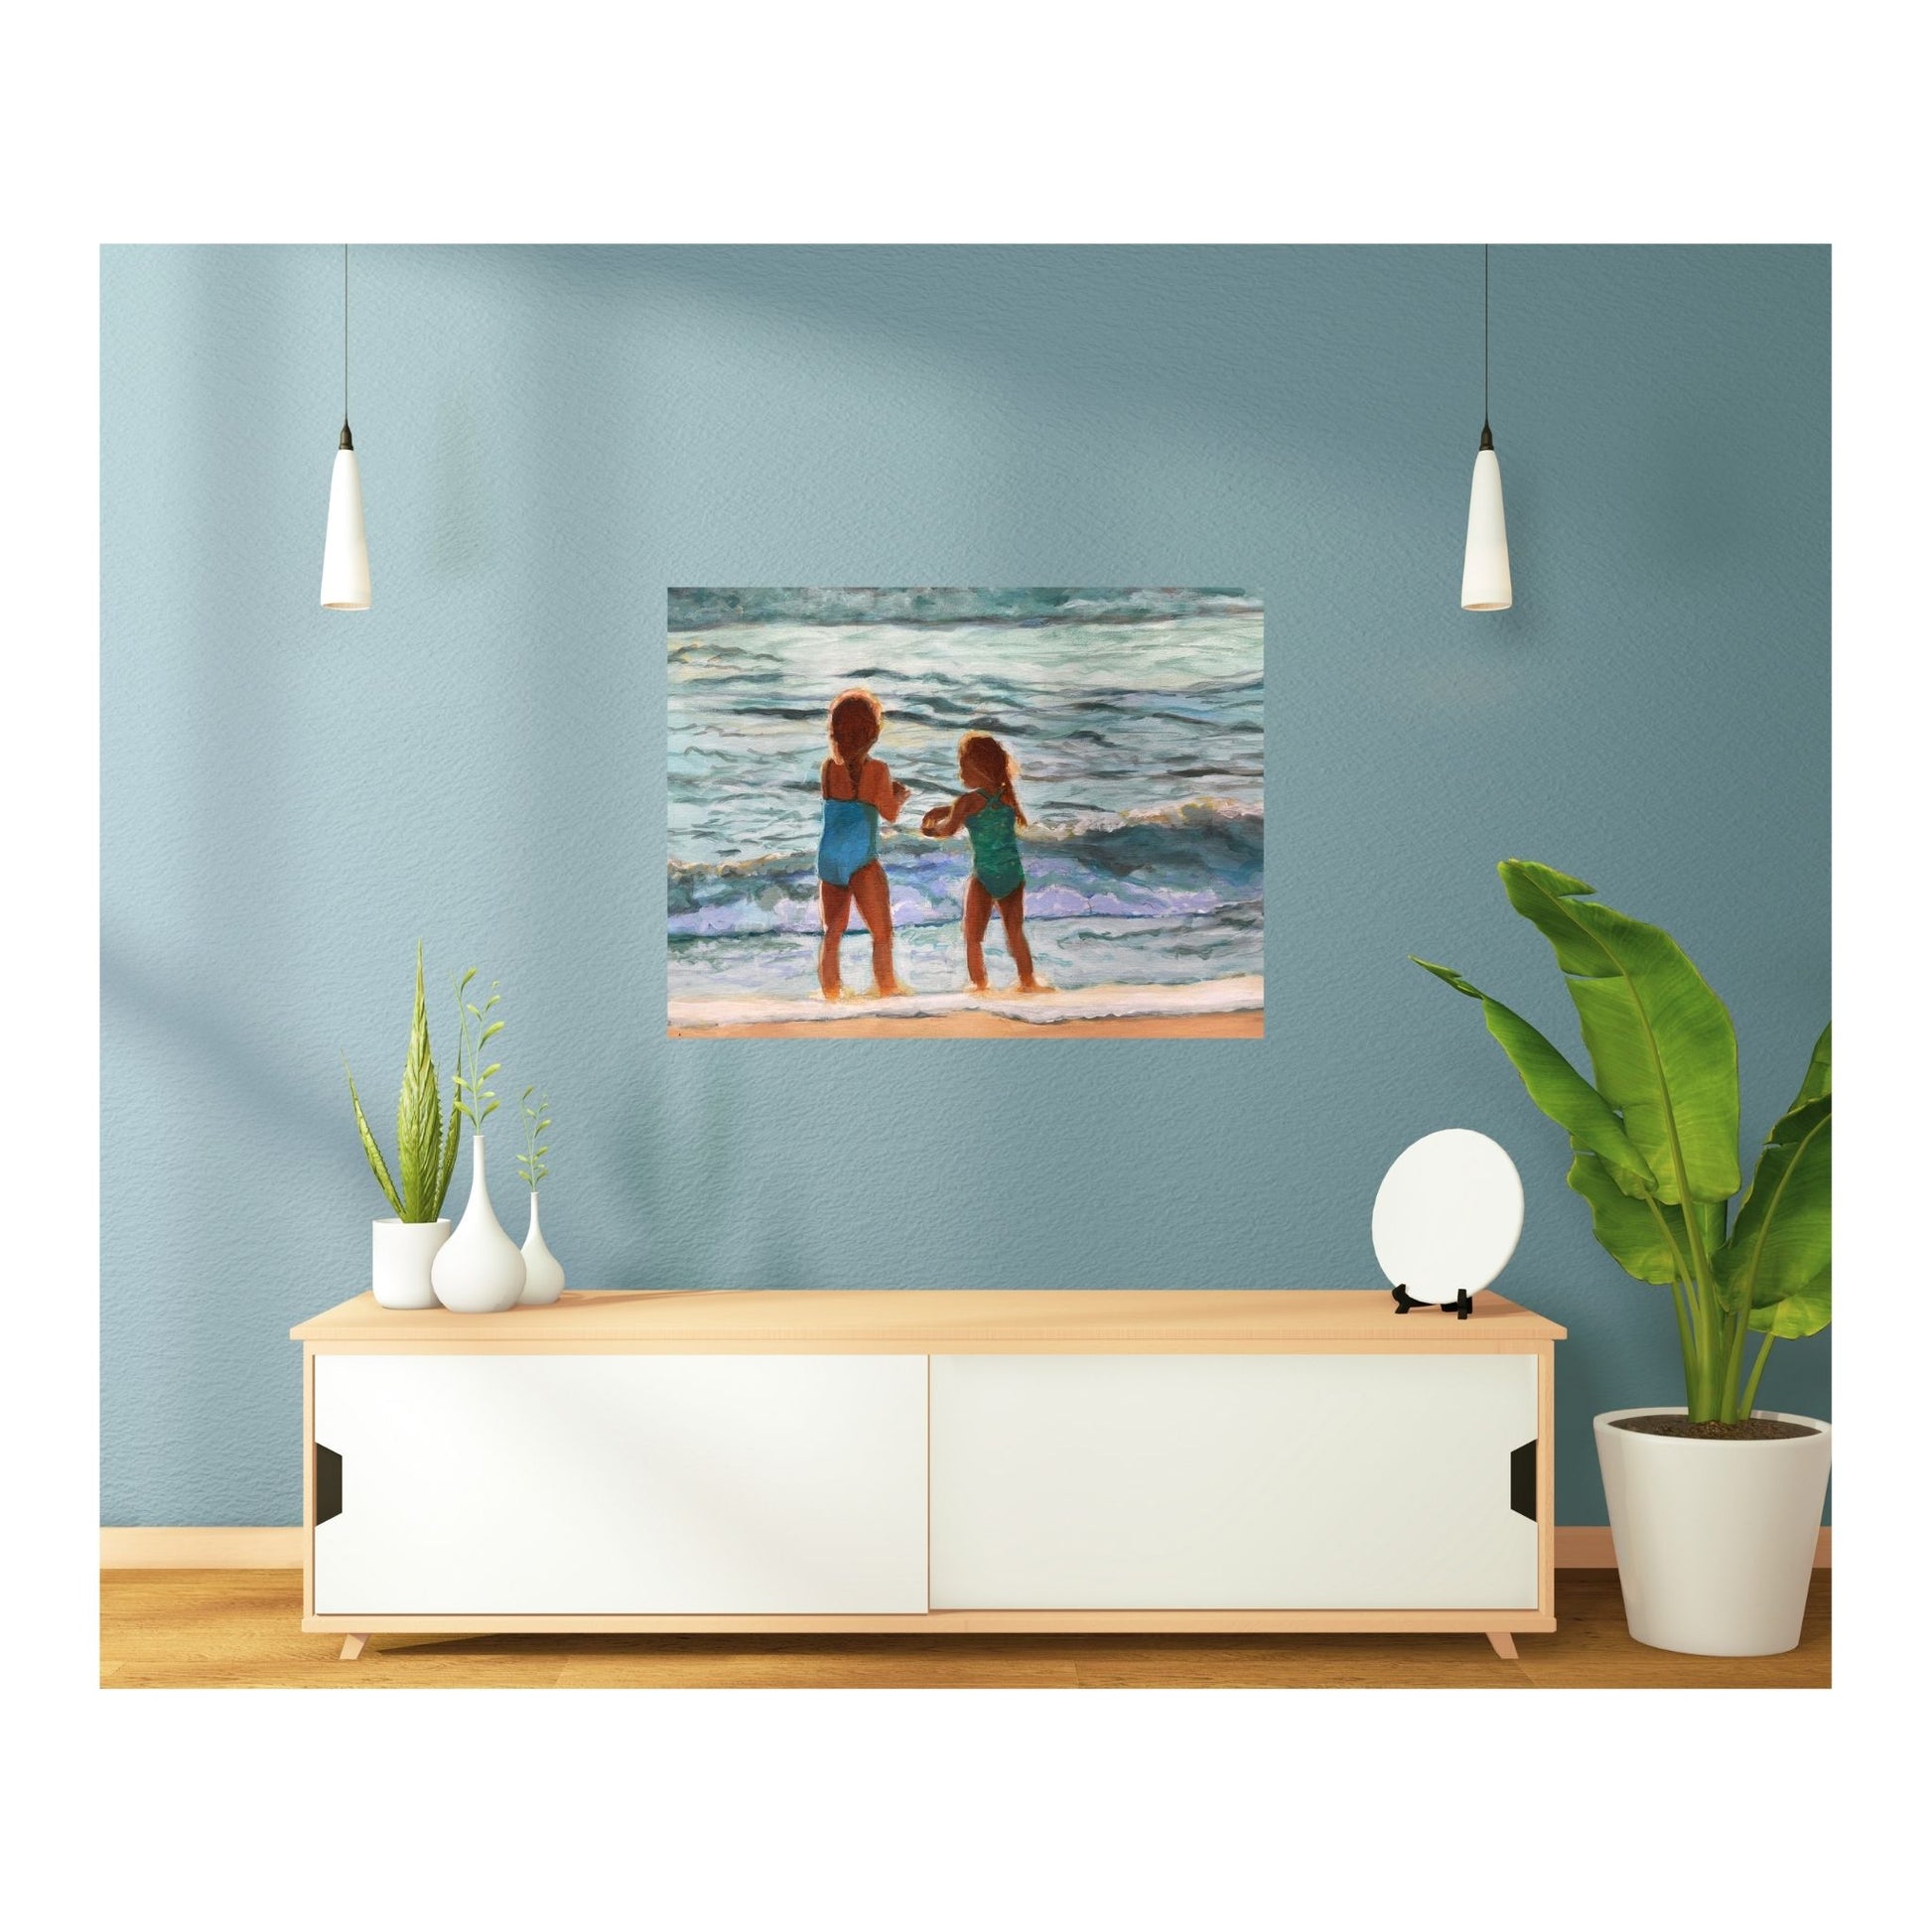 print above a white credenza on a blue wall